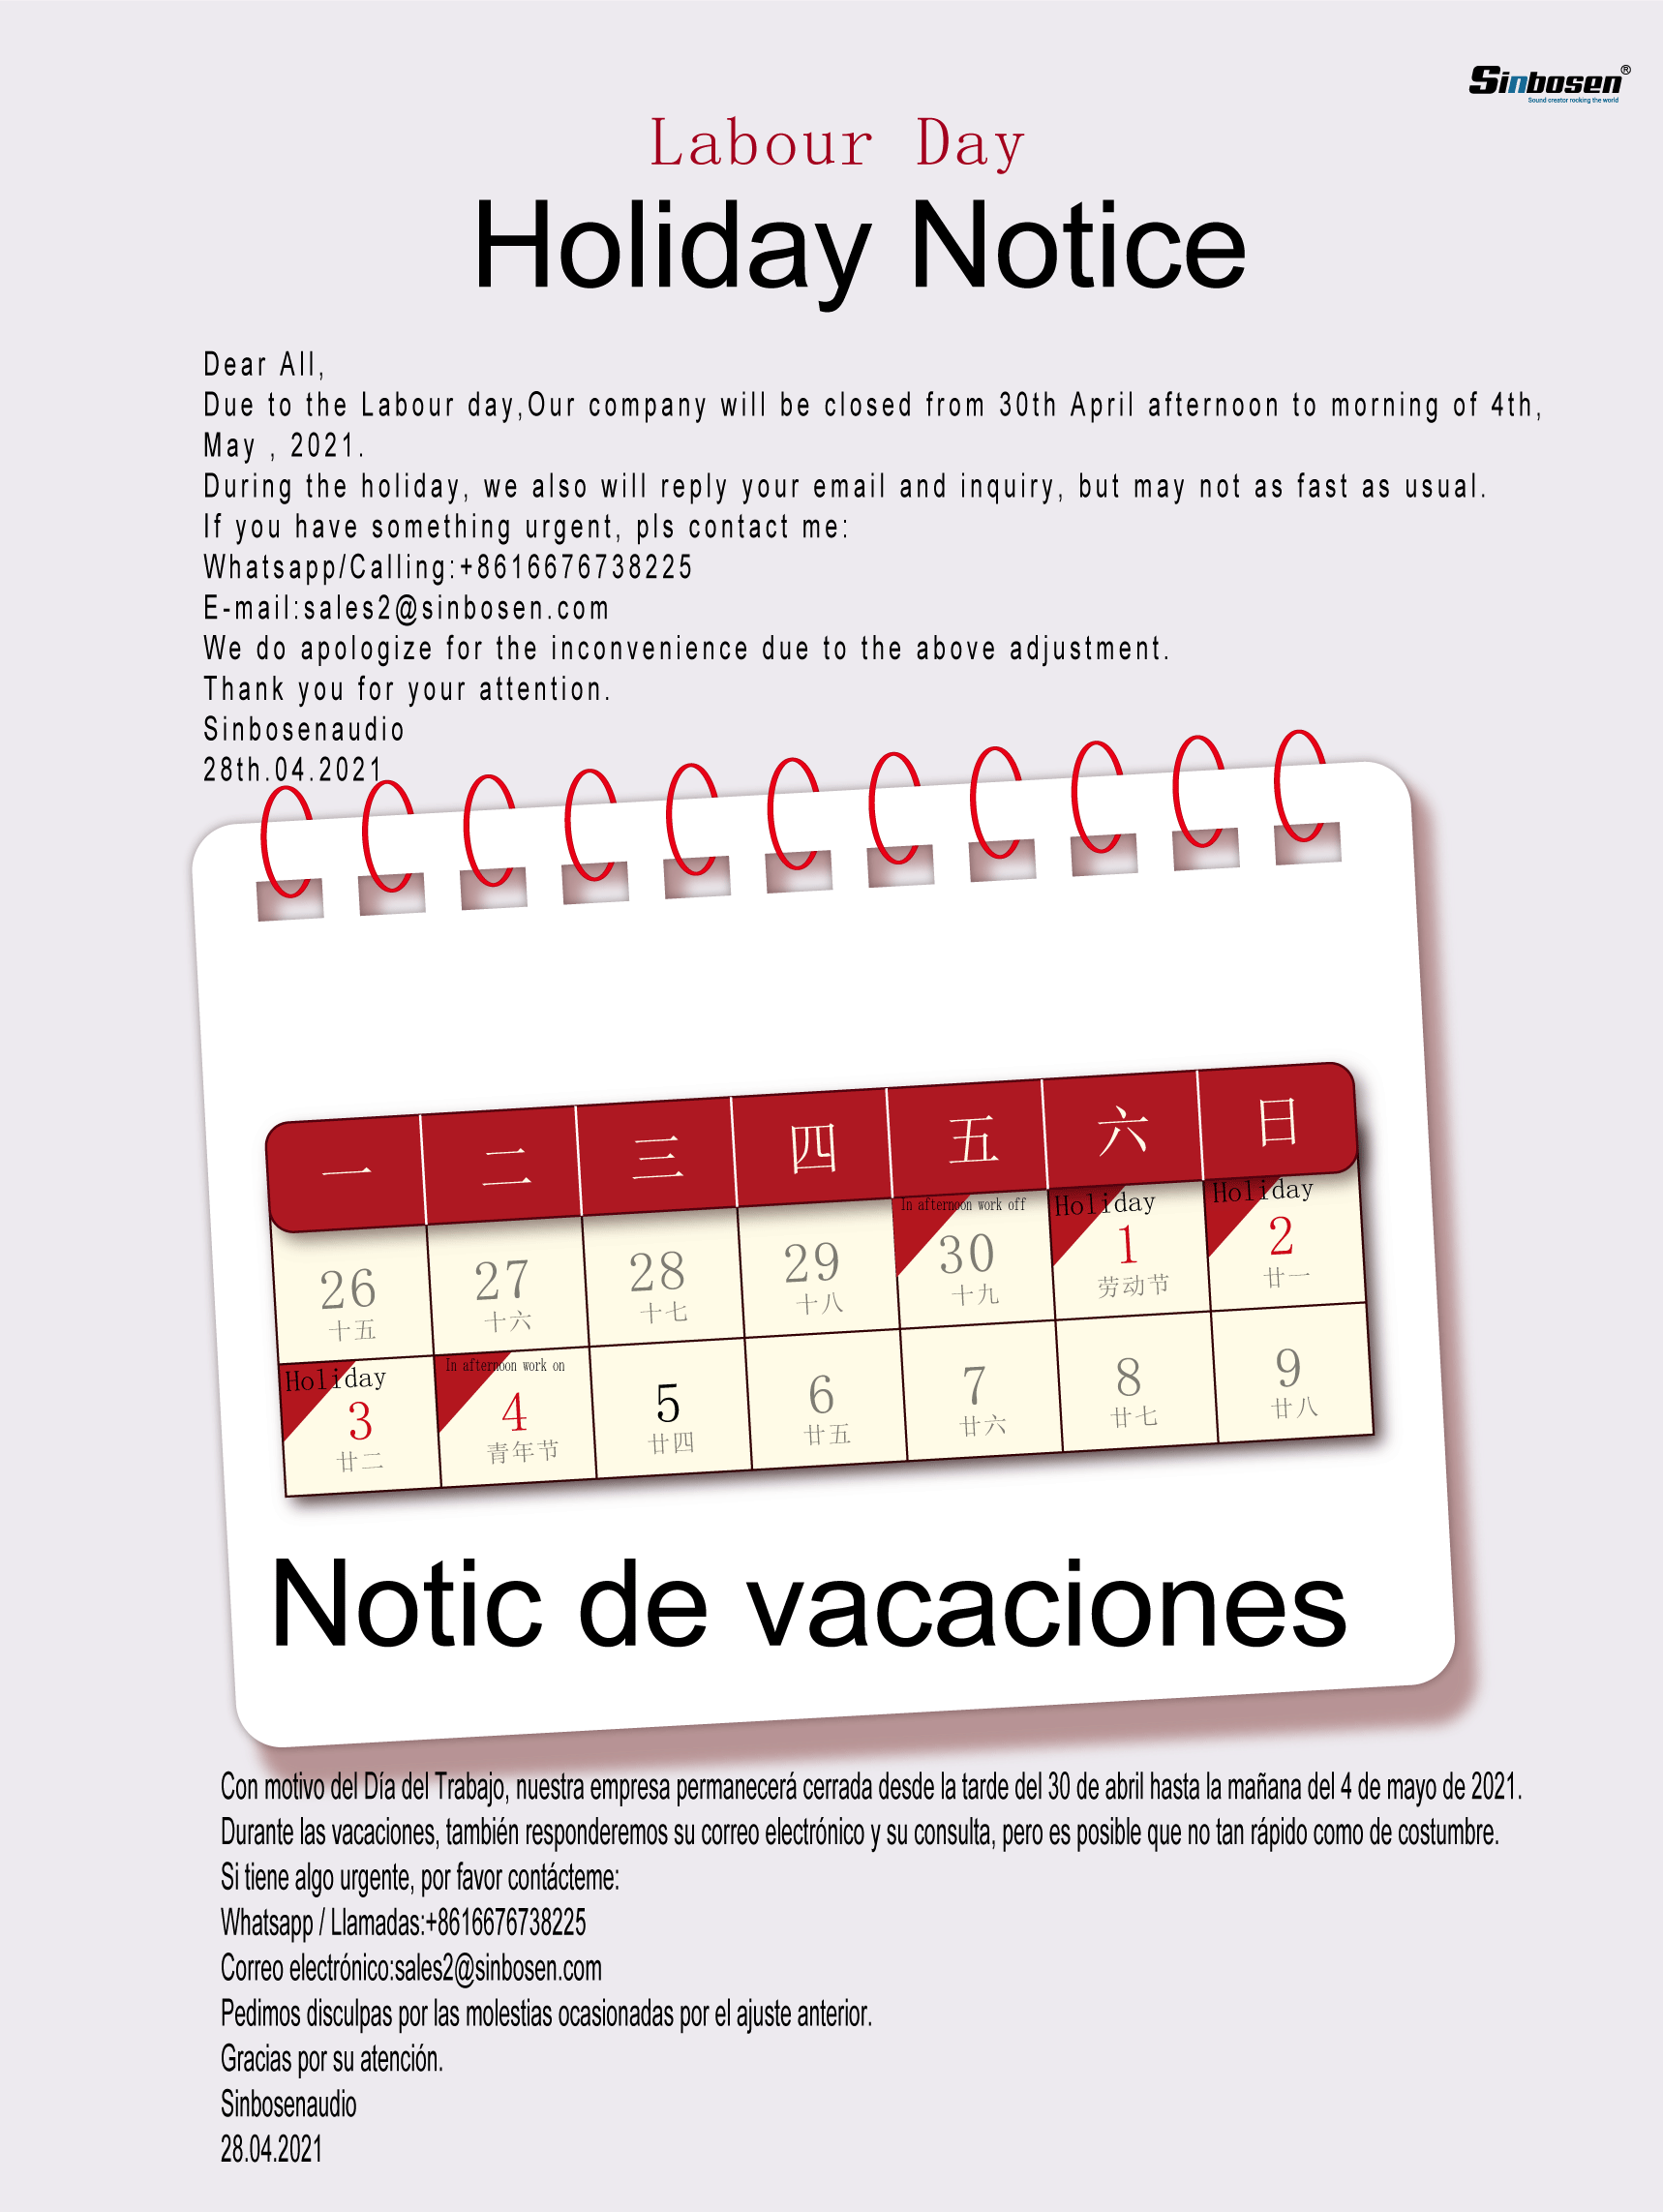 4 days Labour day holiday notice